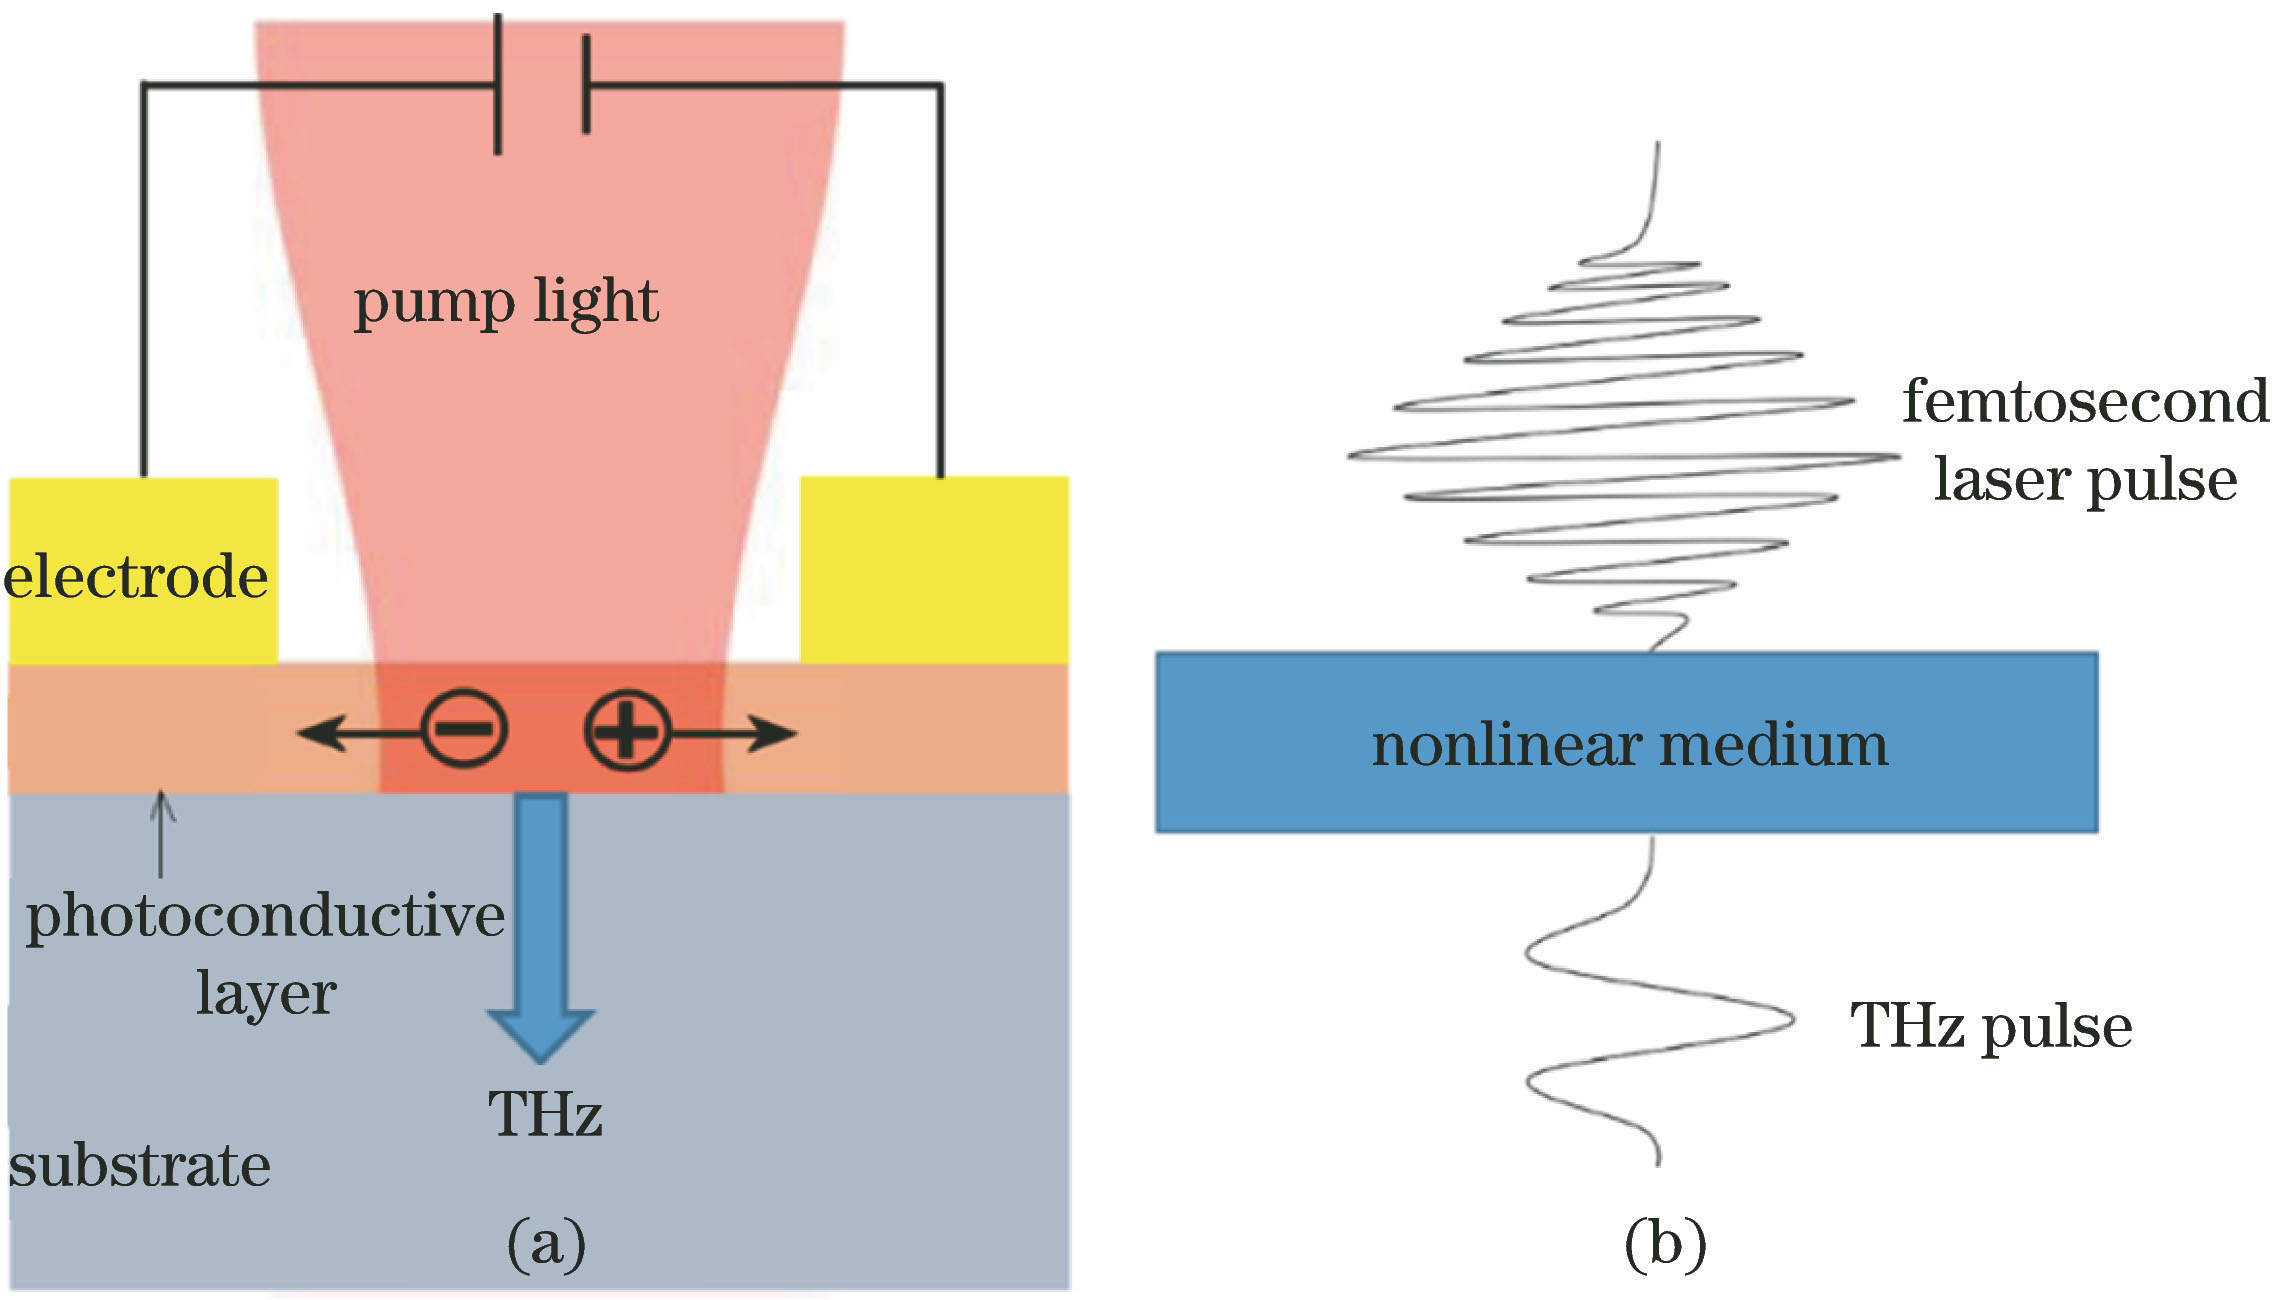 Principle of the generating THz radiation. (a) THz radiation based on the photoconductive effect; (b) THz radiation based on the nonlinear difference frequency effect